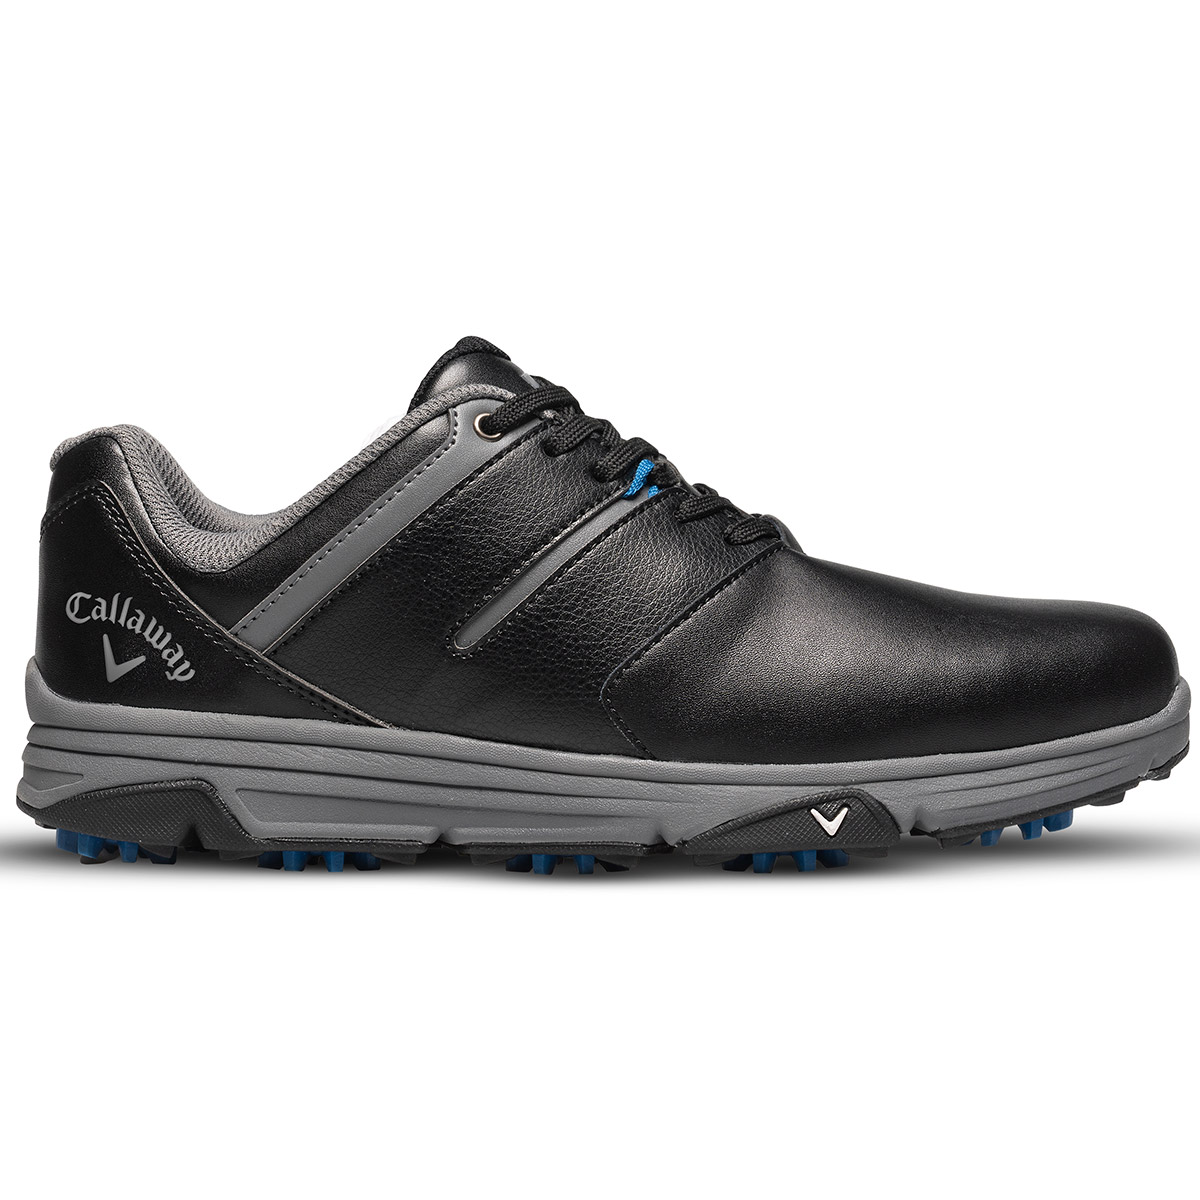 Callaway Golf Chev Mission Shoes from 